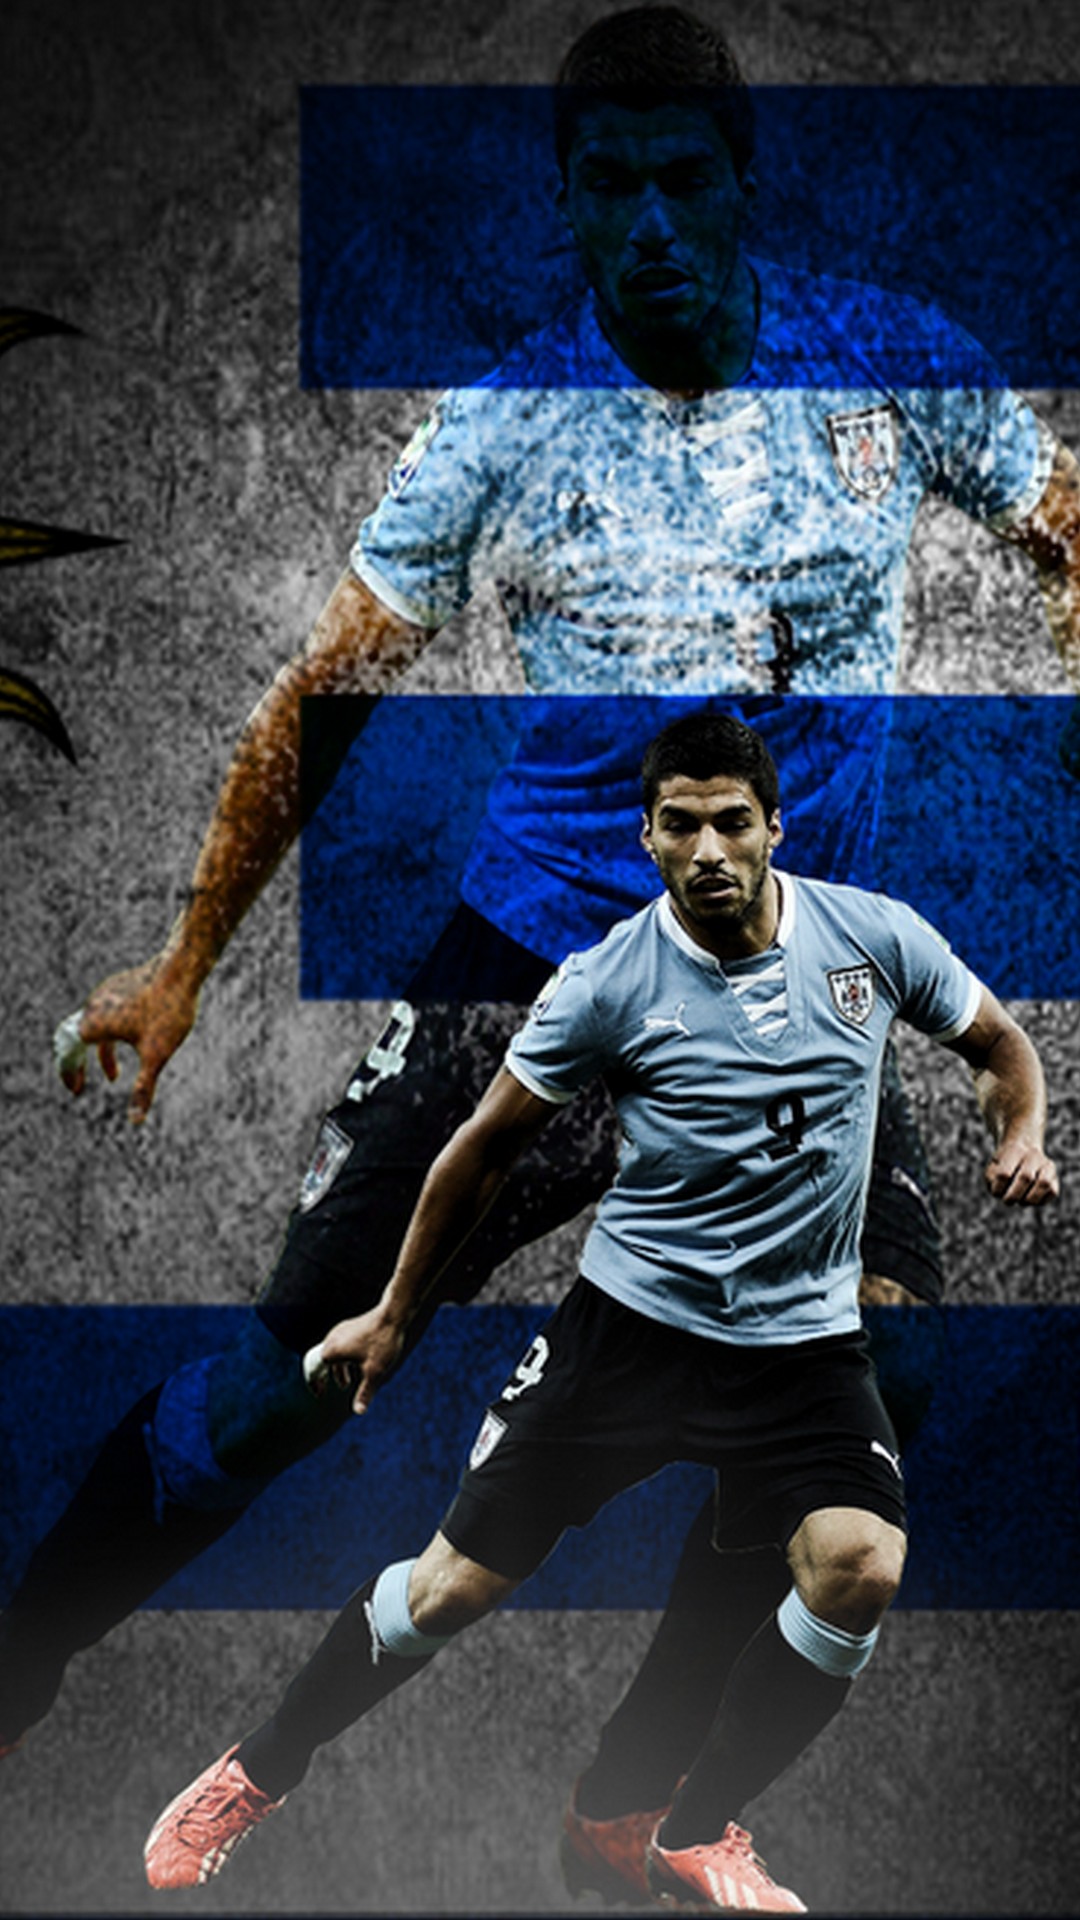 Luis Suarez Uruguay iPhone Wallpaper with image resolution 1080x1920 pixel. You can make this wallpaper for your iPhone 5, 6, 7, 8, X backgrounds, Mobile Screensaver, or iPad Lock Screen